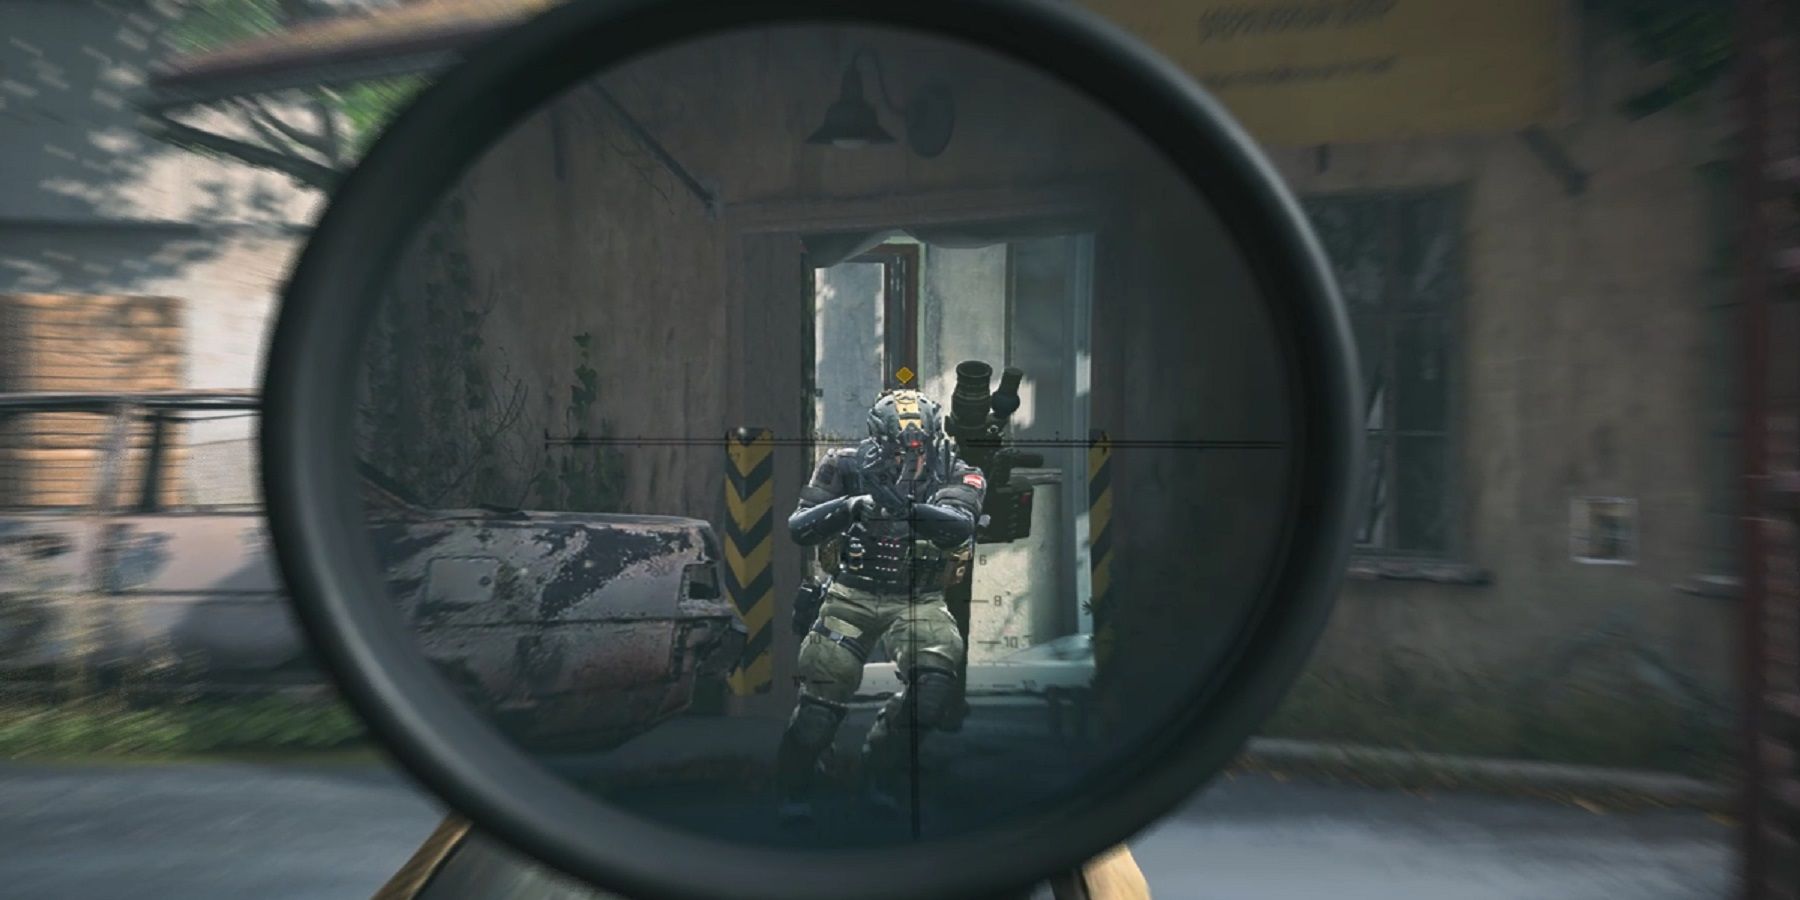 Call of Duty Modern Warfare 2 Gameplay Image Aiming Down Sniper Scope